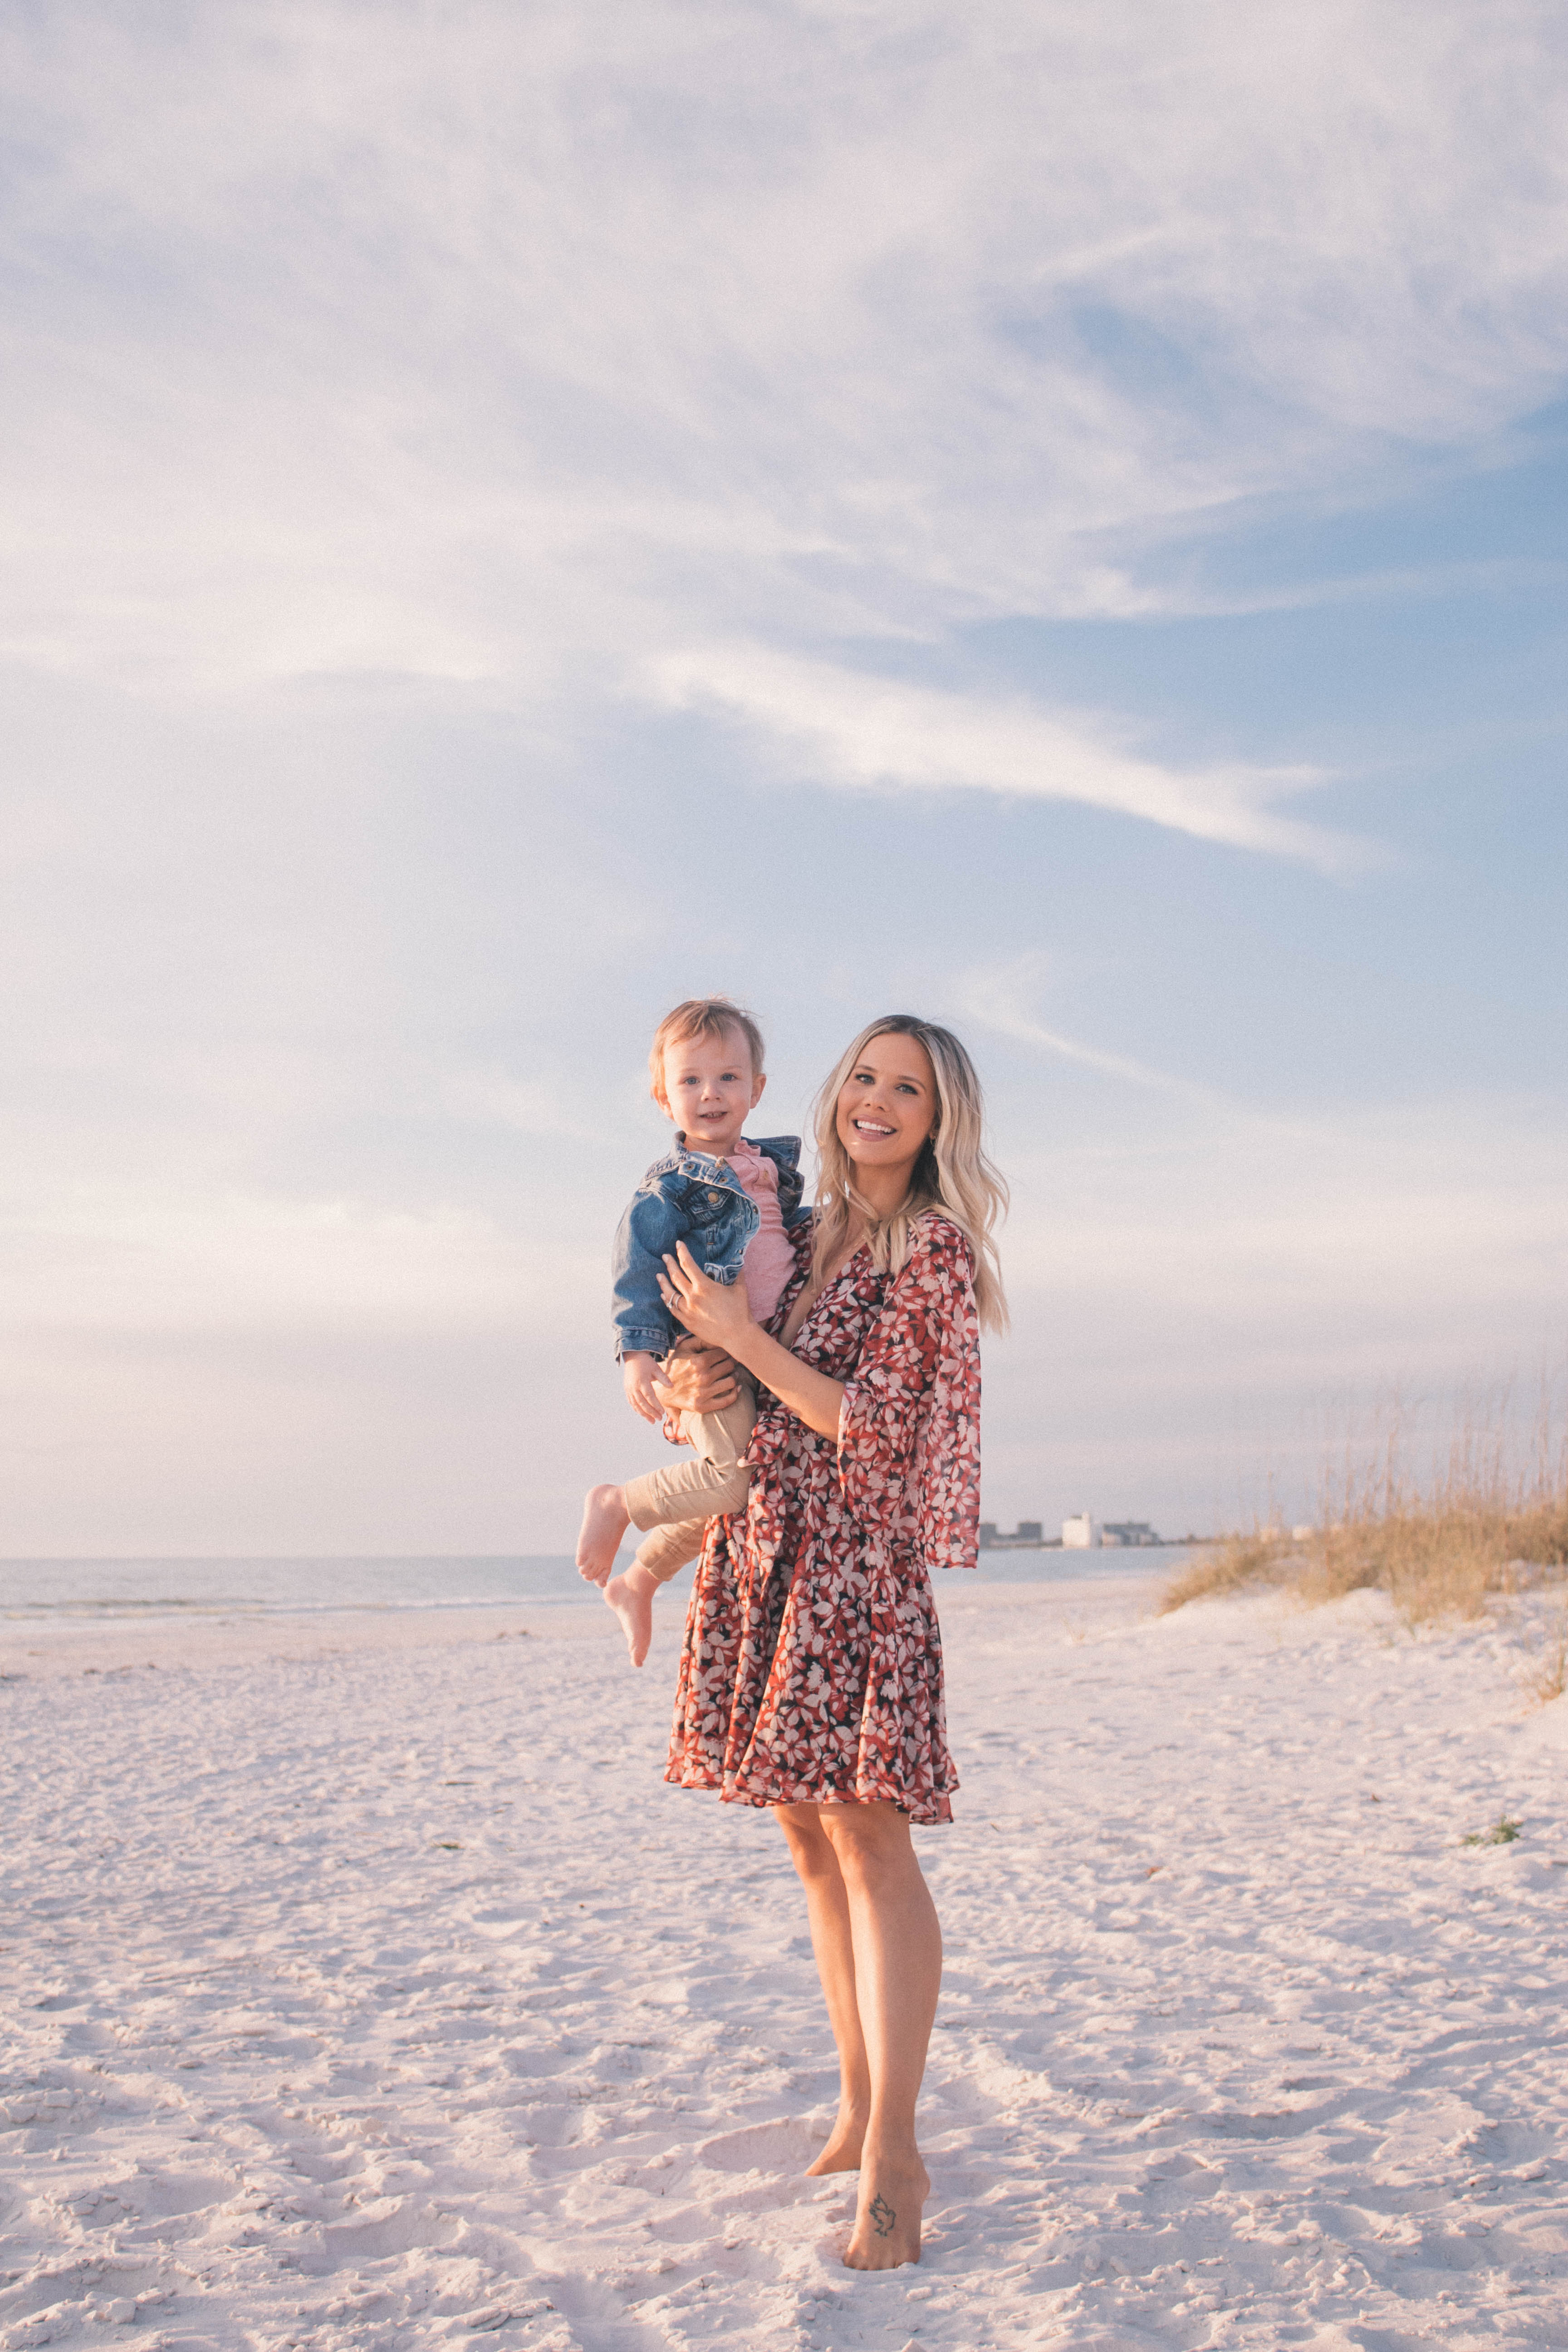 How to Balance Being a Working Mom #workingmom